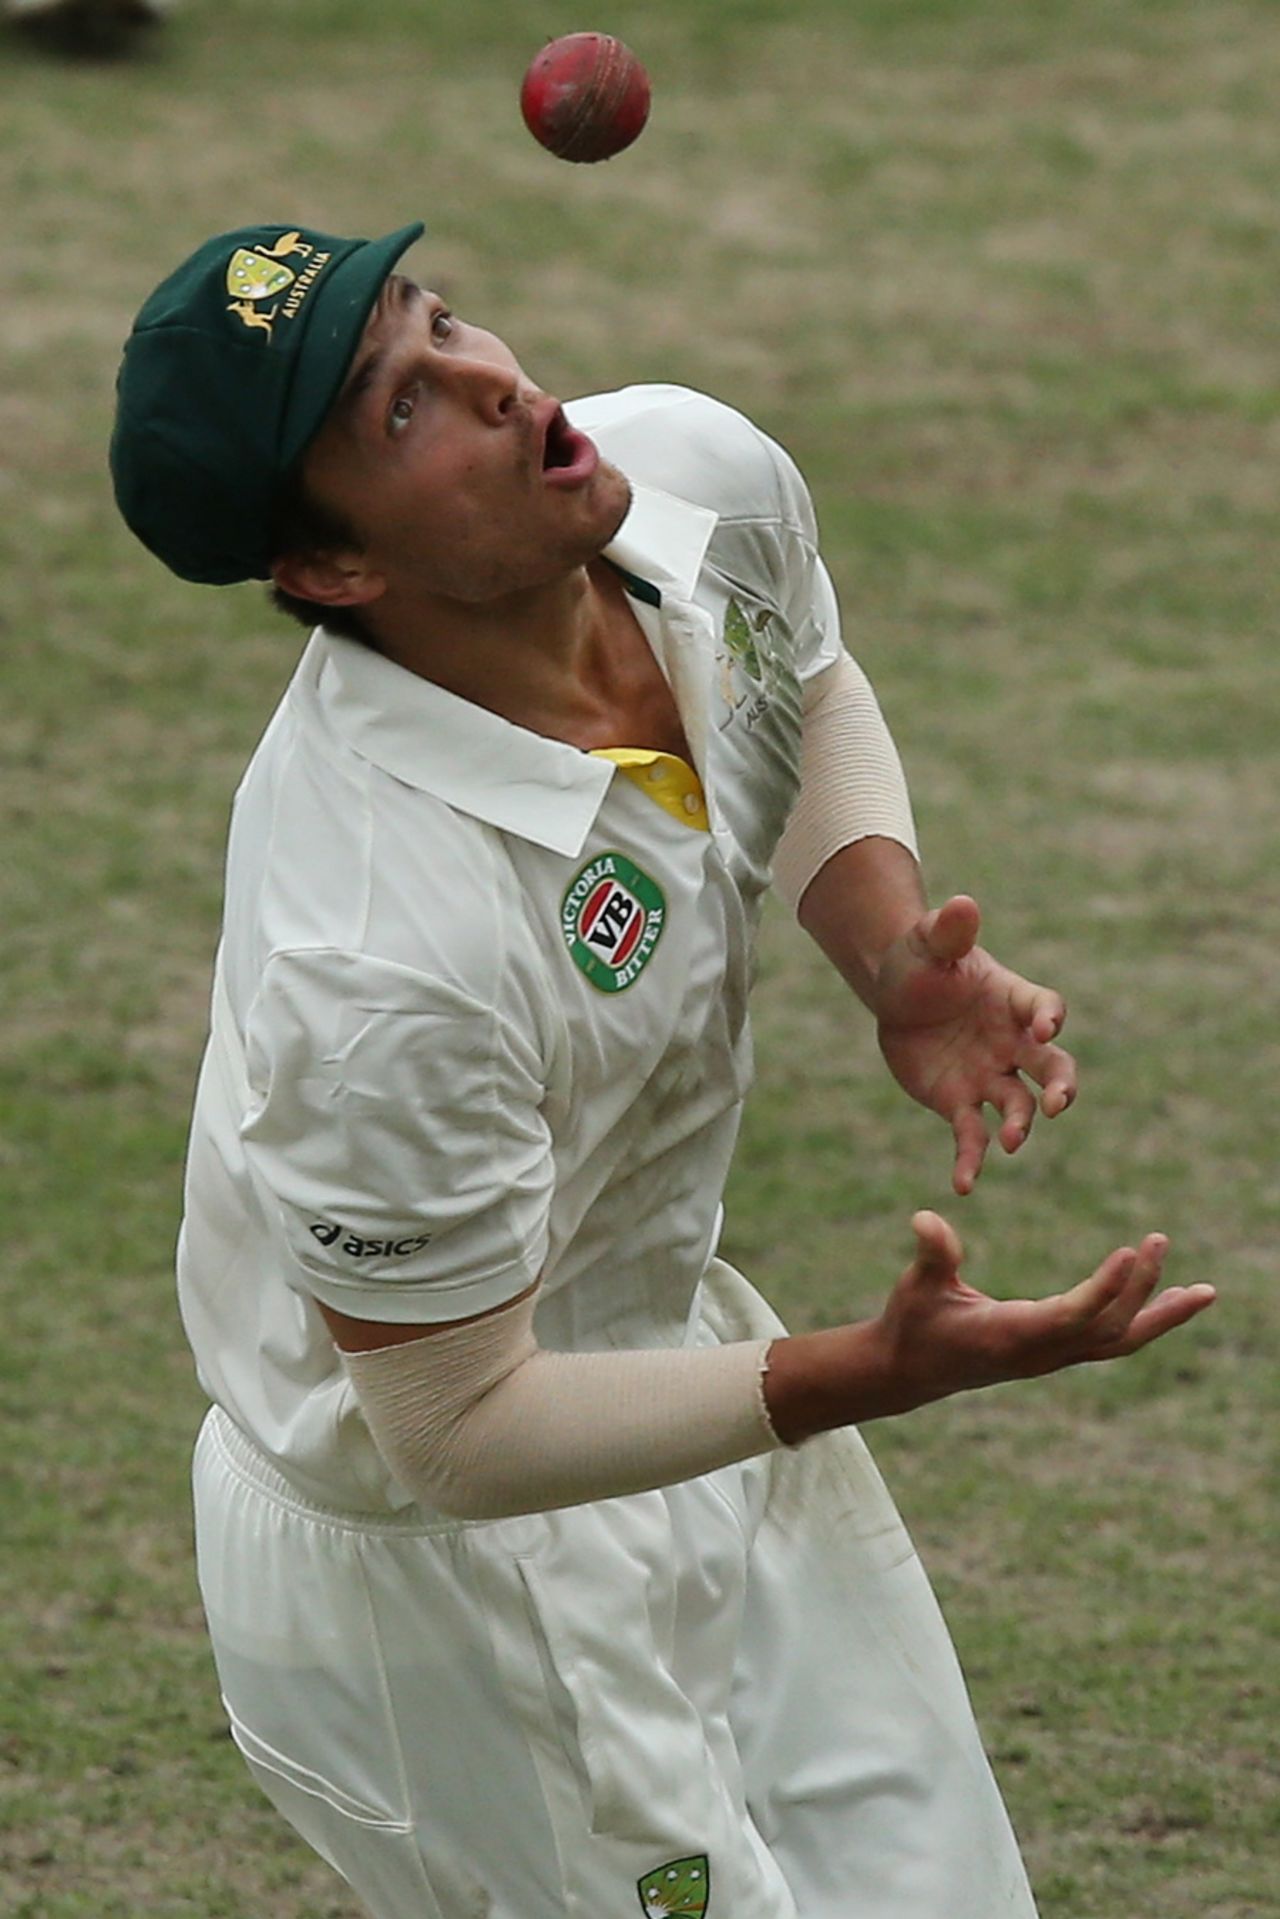 Nathan Coulter-Nile takes a catch to dismiss Alviro Petersen, Australia A v South Africans, 2nd day, SCG, November 3, 2012